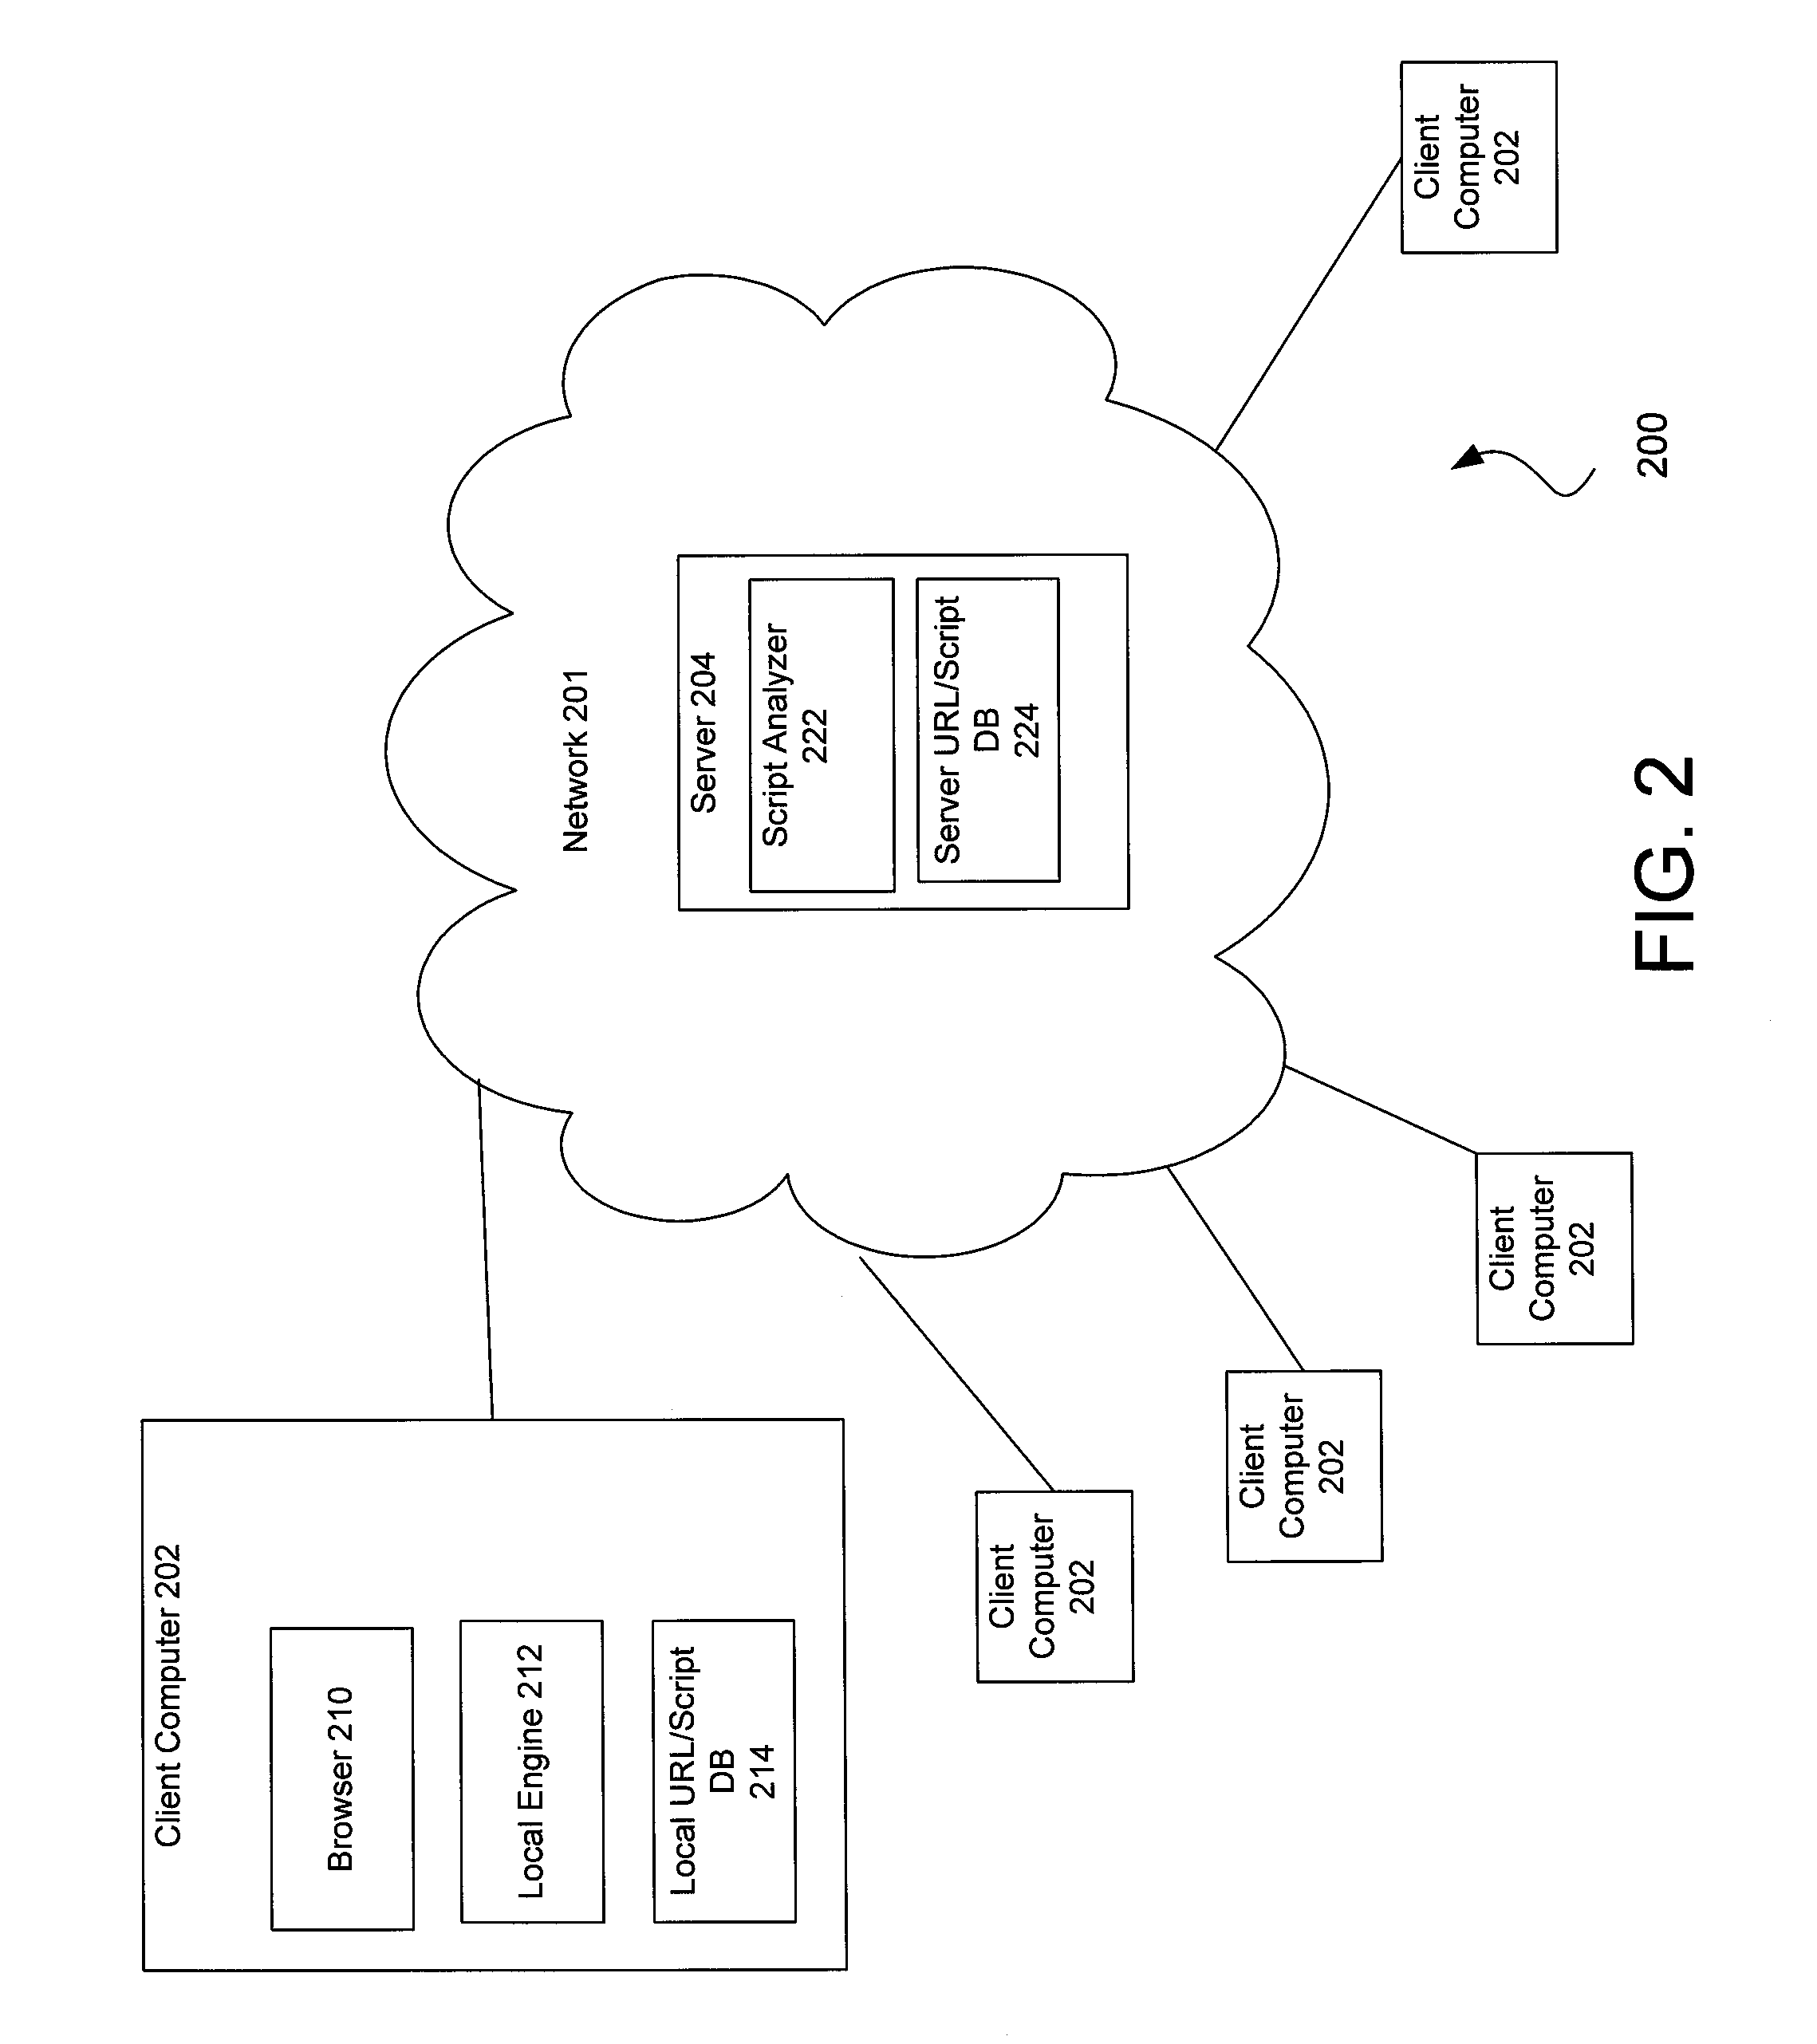 Apparatus and methods for detecting malicious scripts in web pages